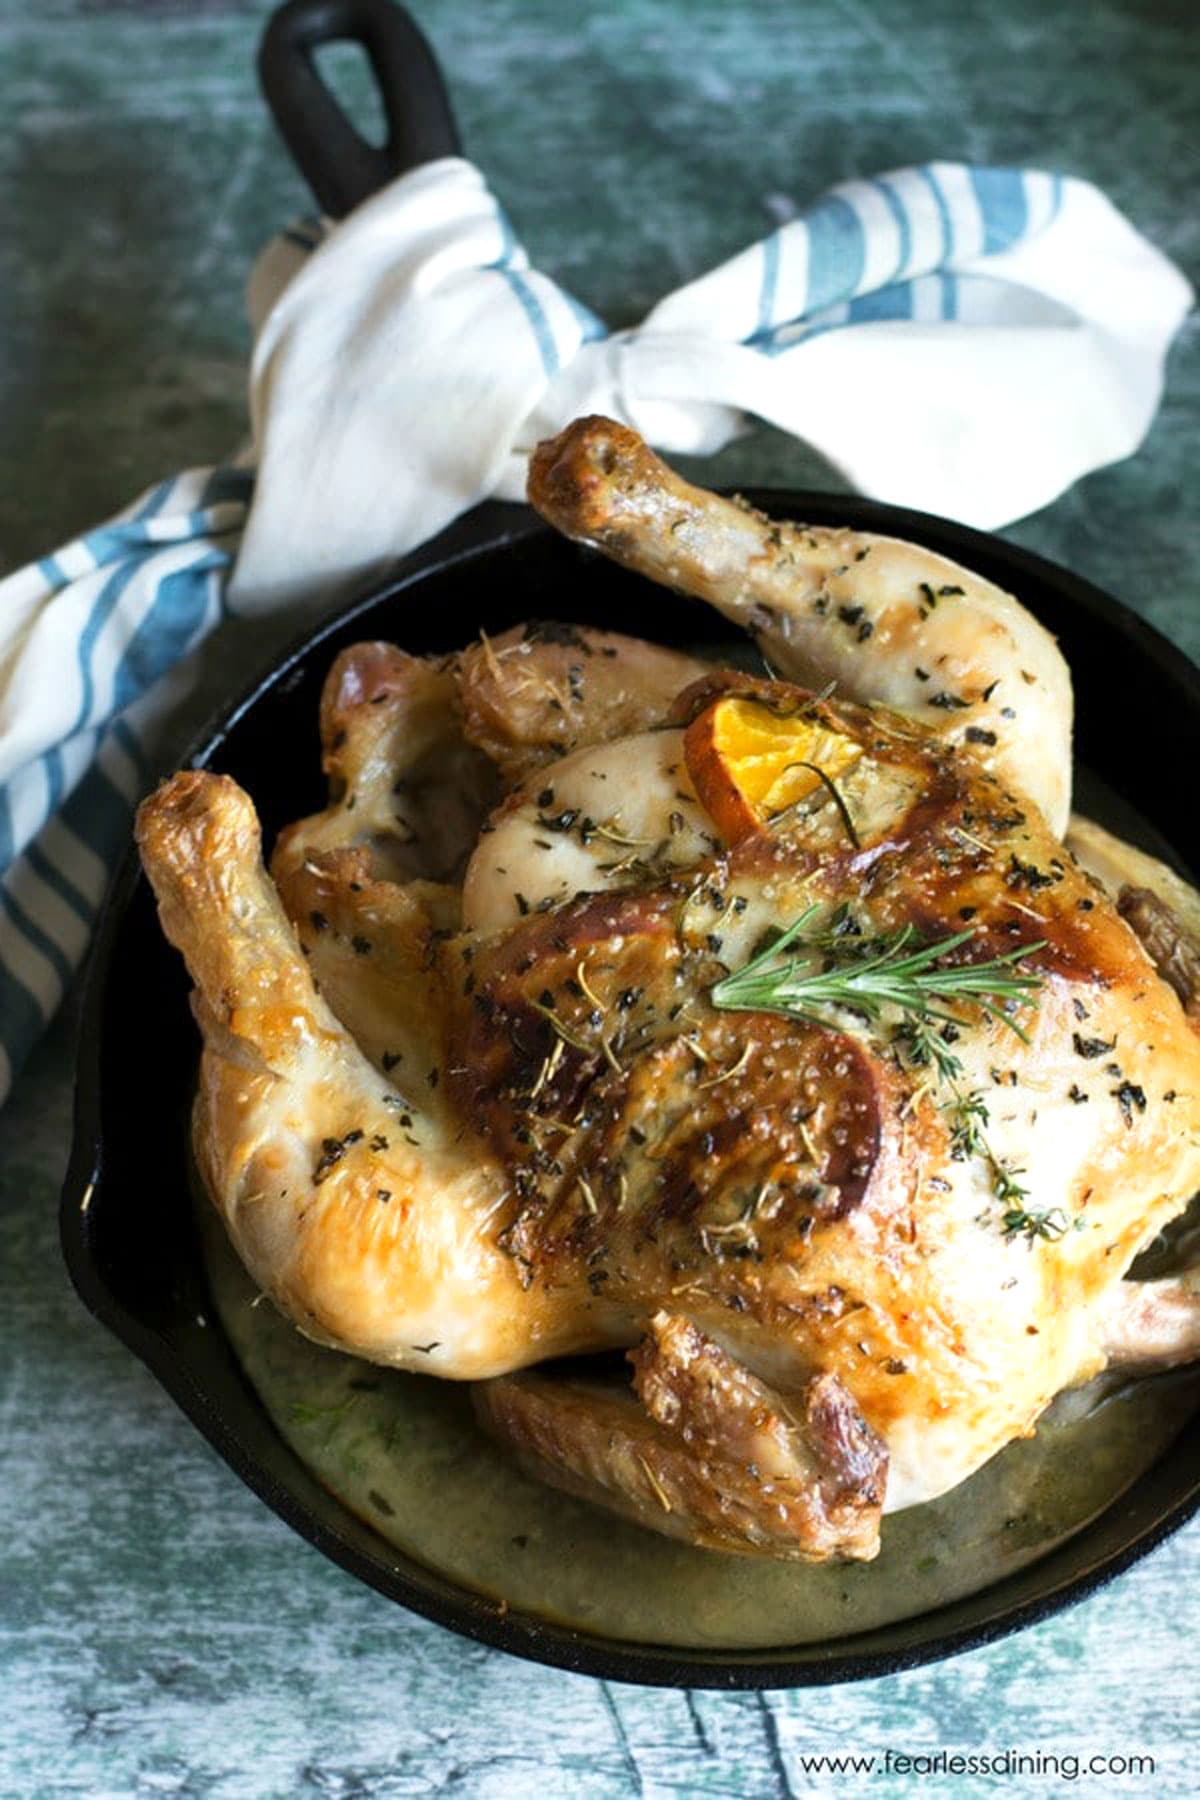 A whole roasted chicken in a cast iron skillet.